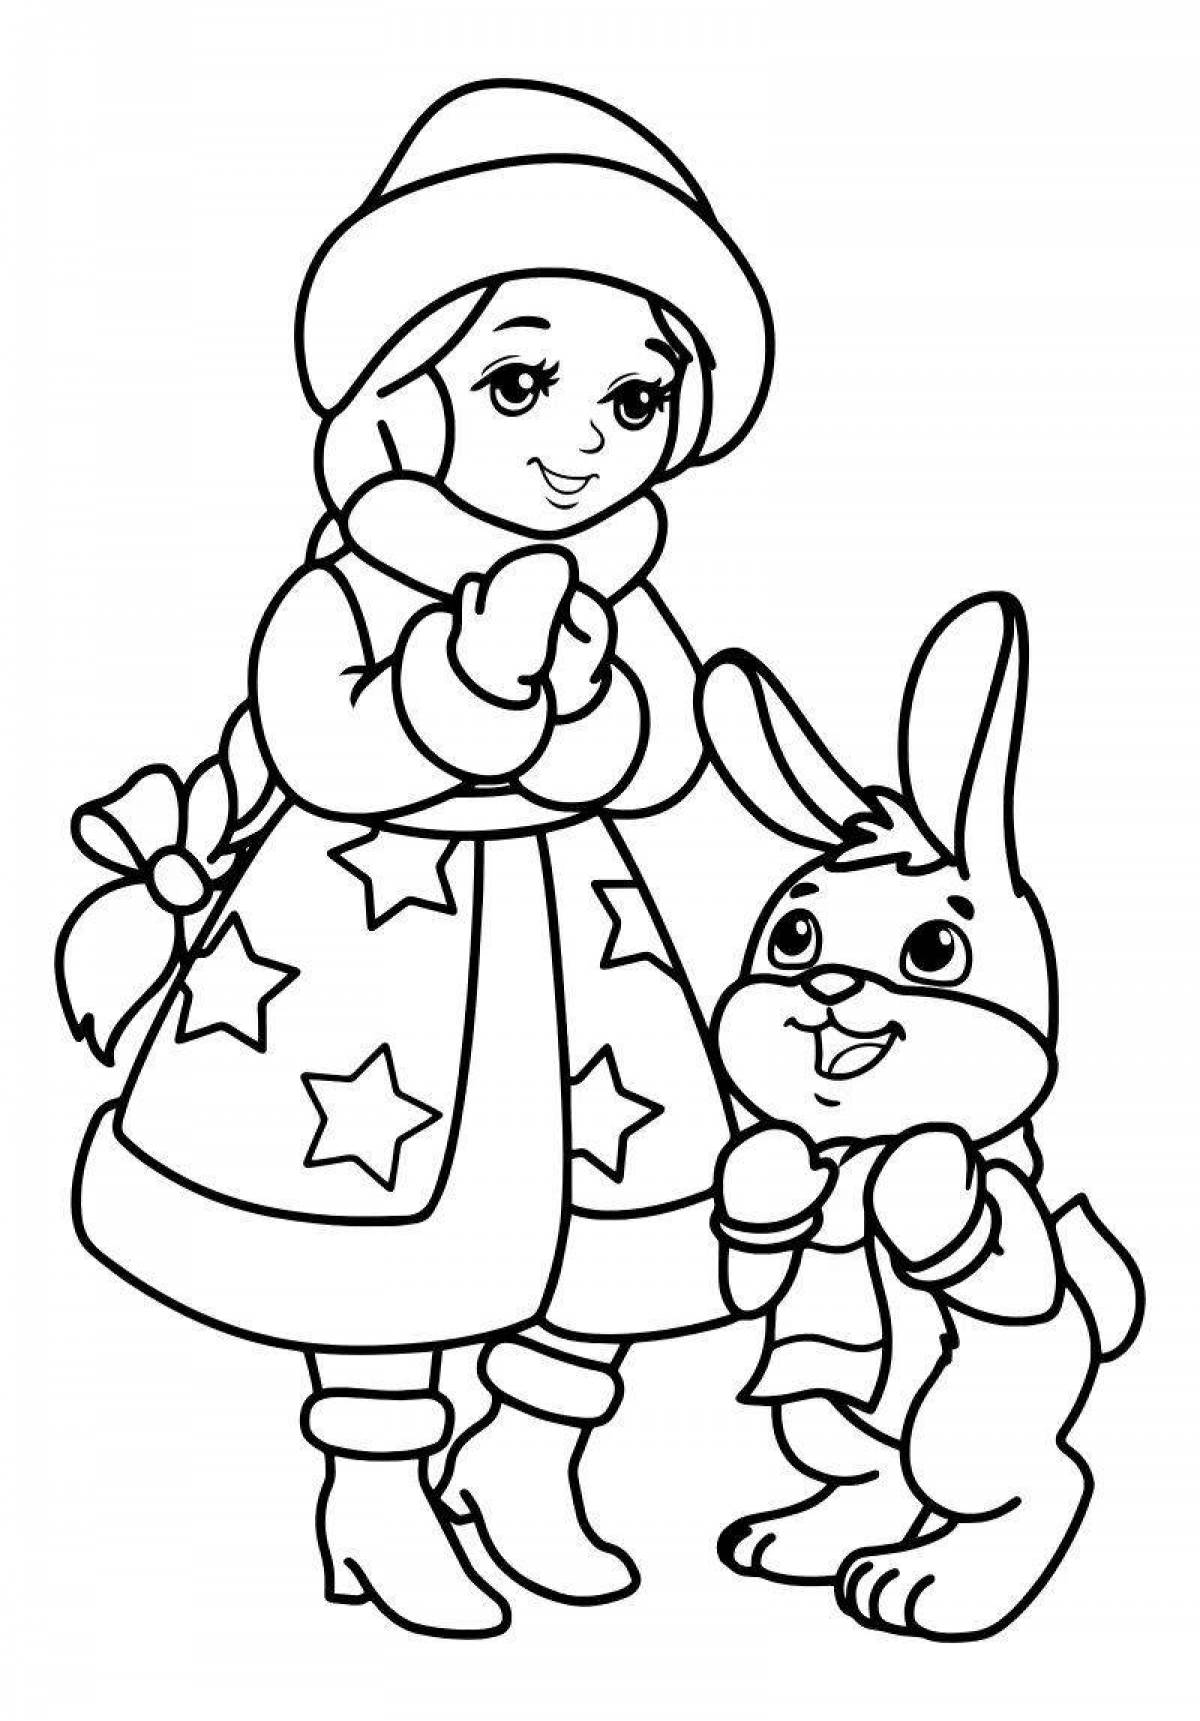 Color-laden coloring page bunny new year